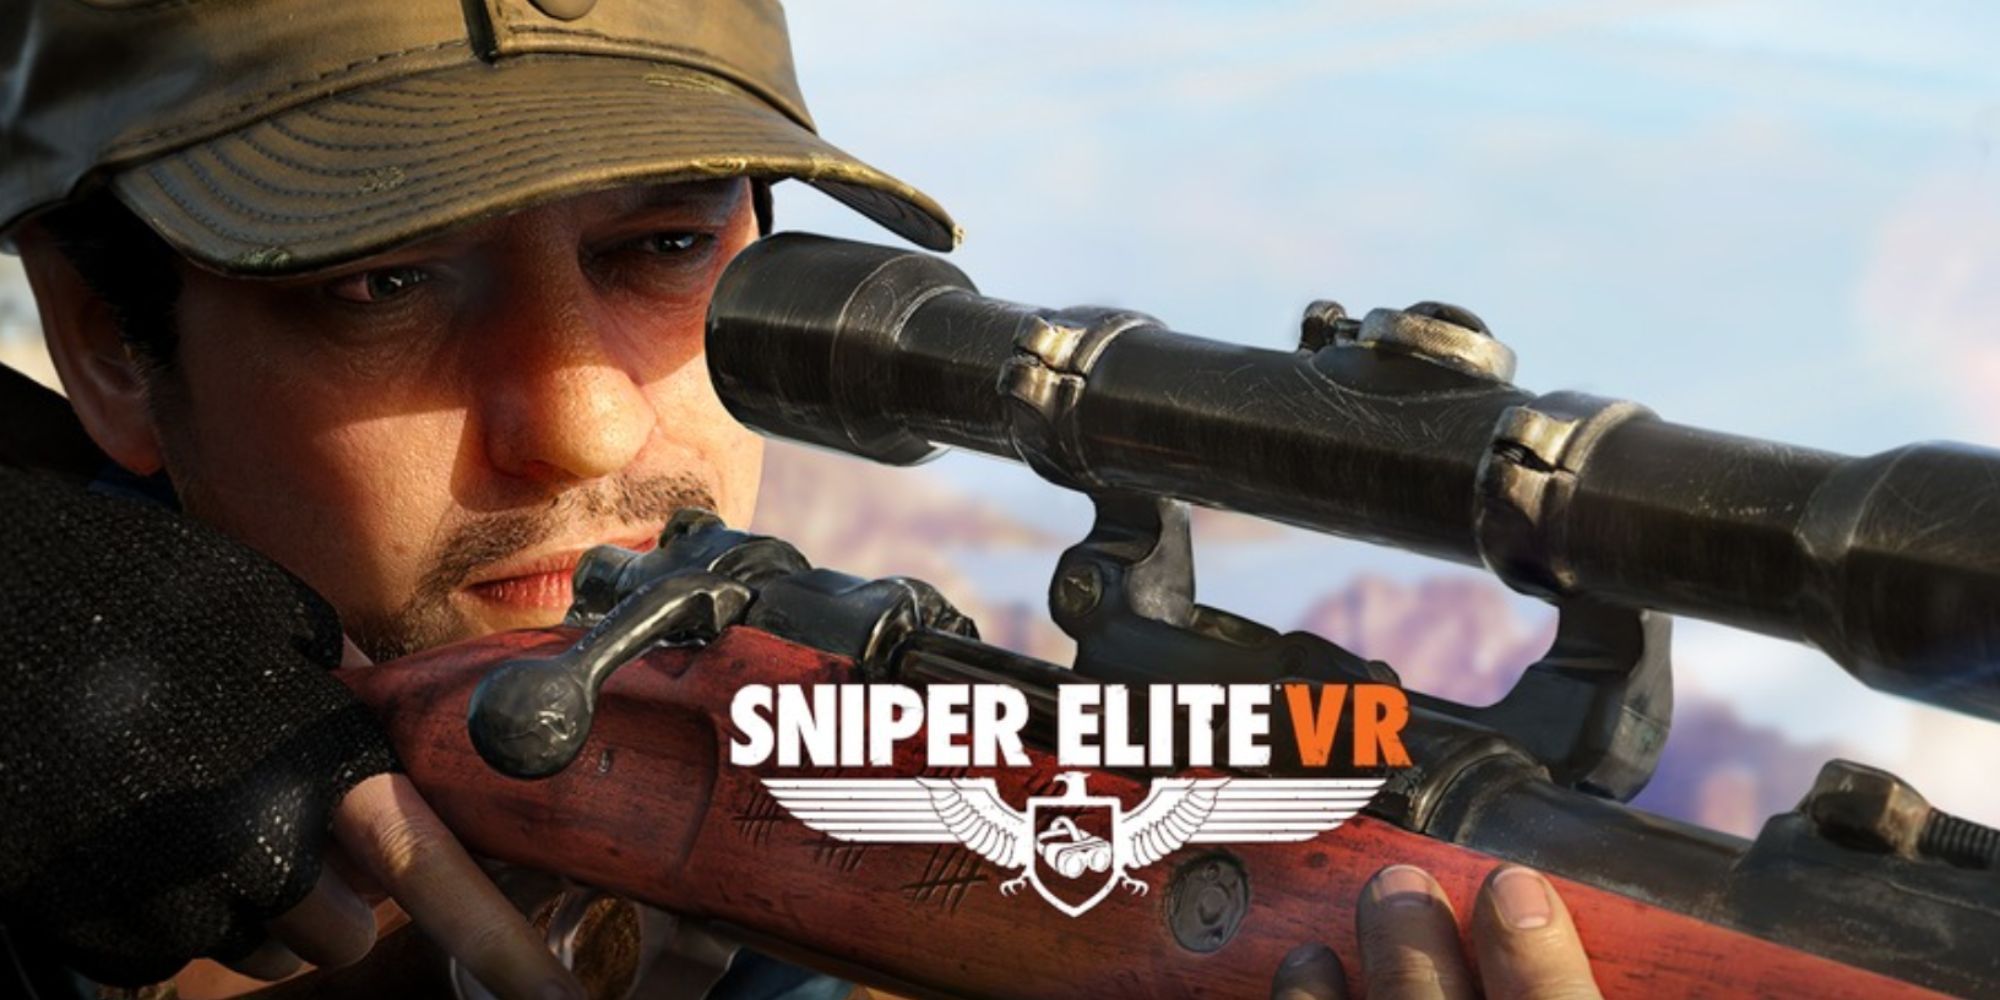 Sniper Elite VR Soldier Aiming Weapon